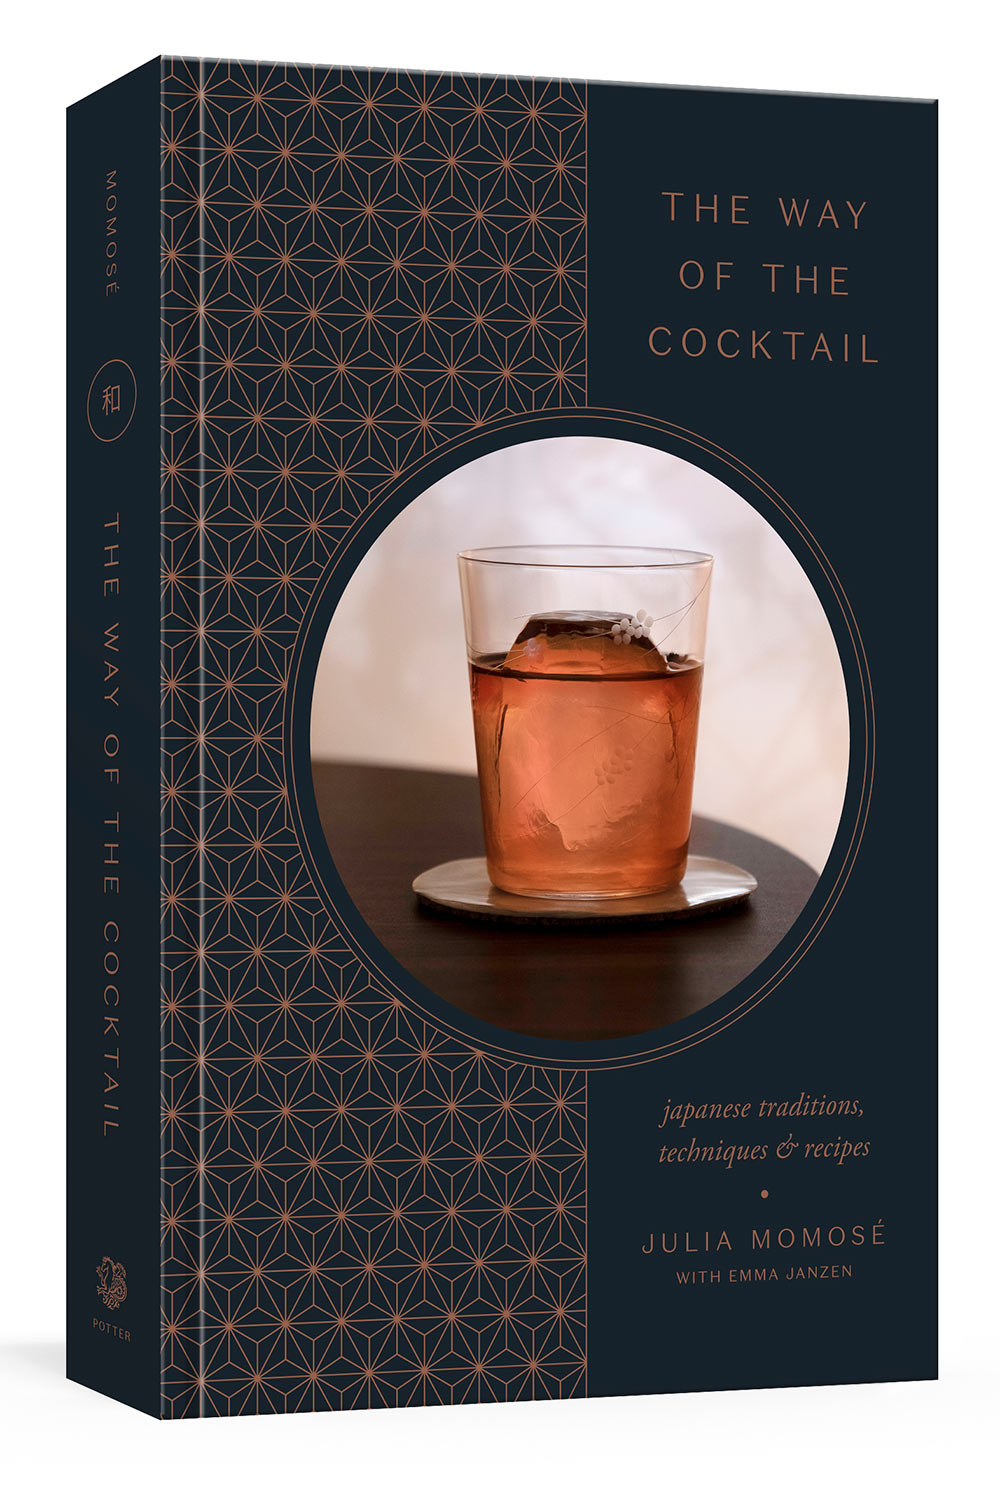 3D_The-Way-of-the-Cocktail-1000px-for-web